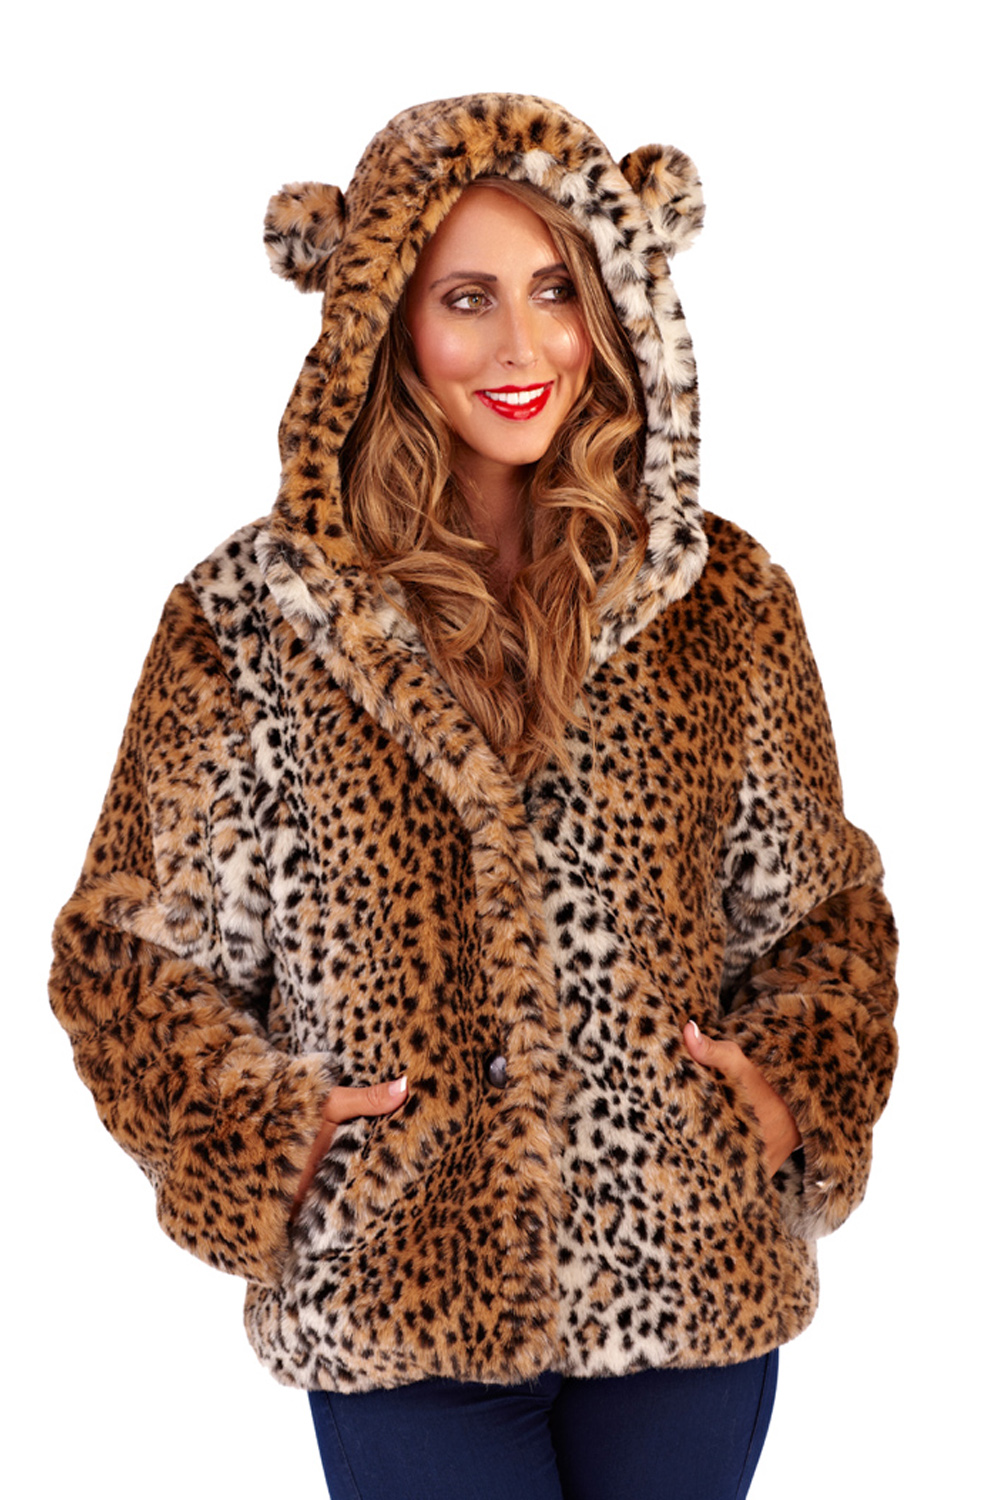 Womens Leopard Print Coat New Ladies Faux Fur Hooded Jacket With Animal